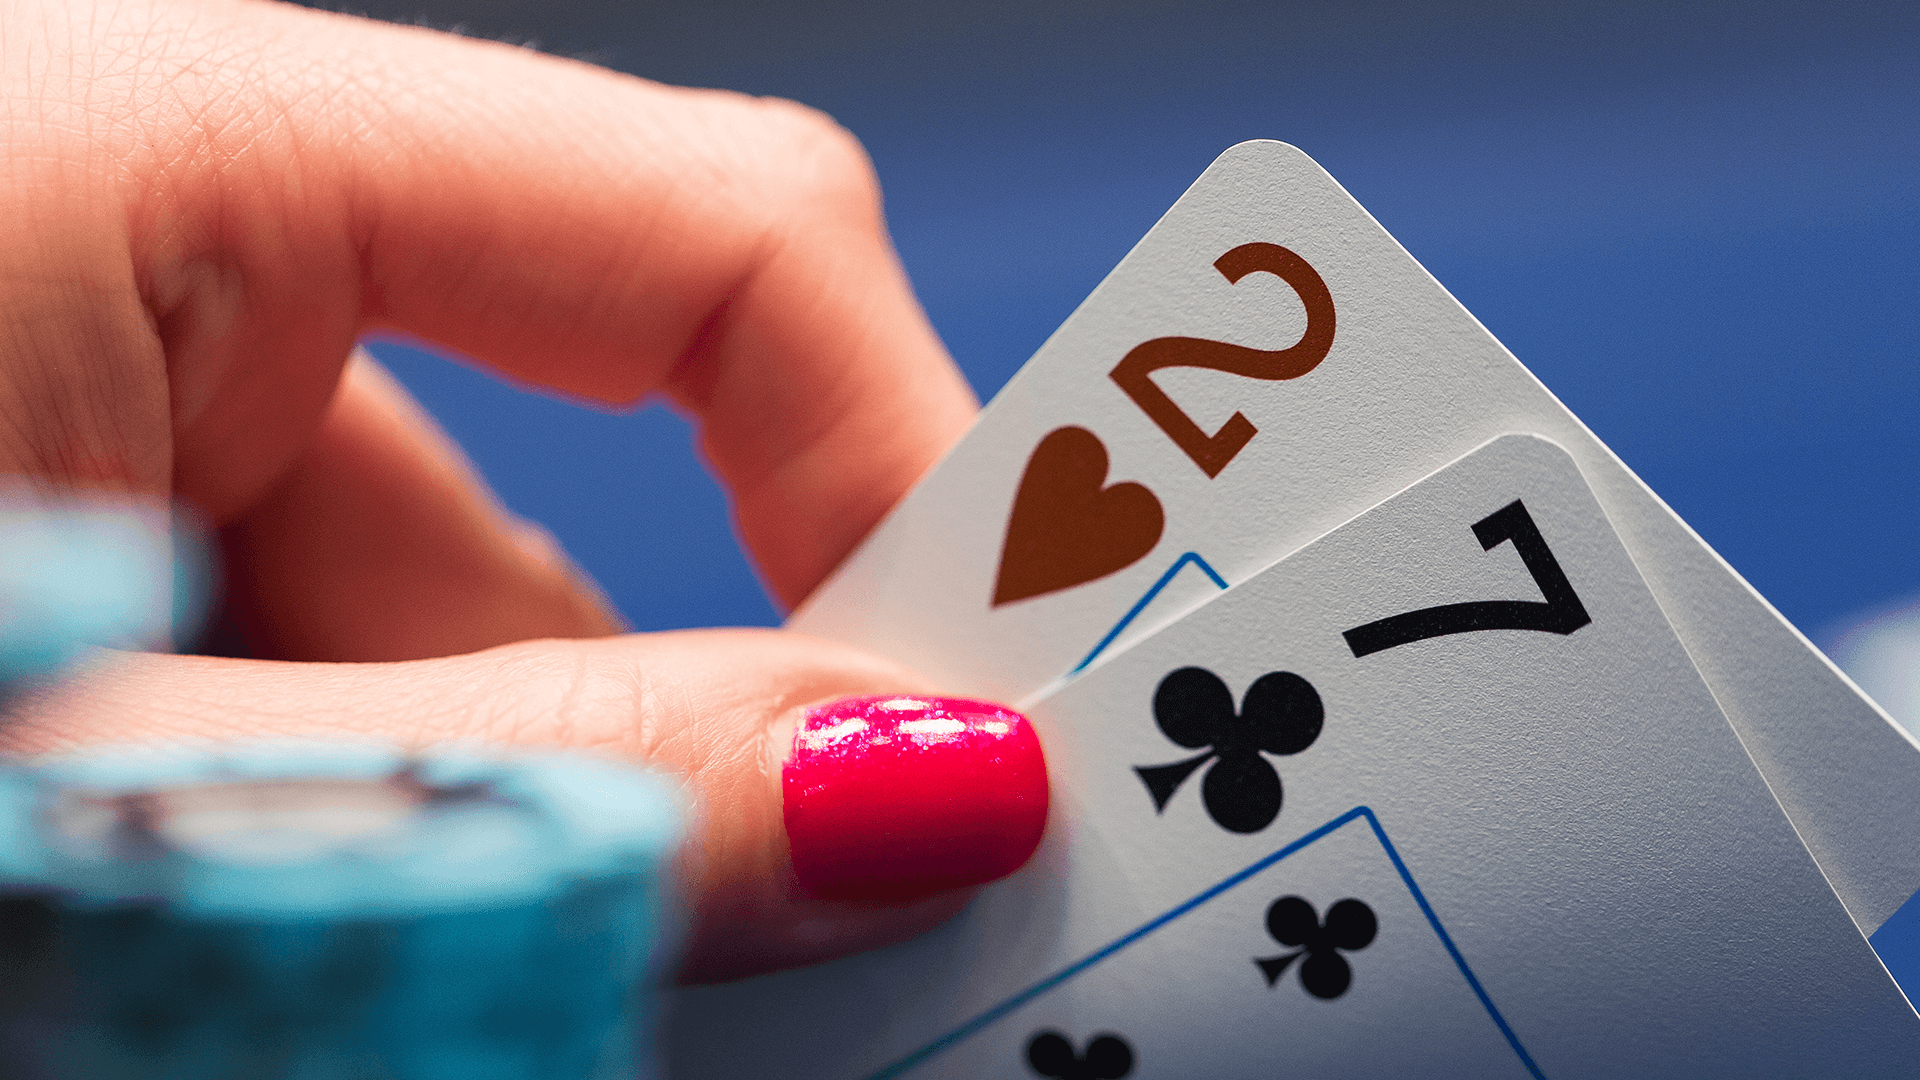 These are the advantages of online gambling and online sites